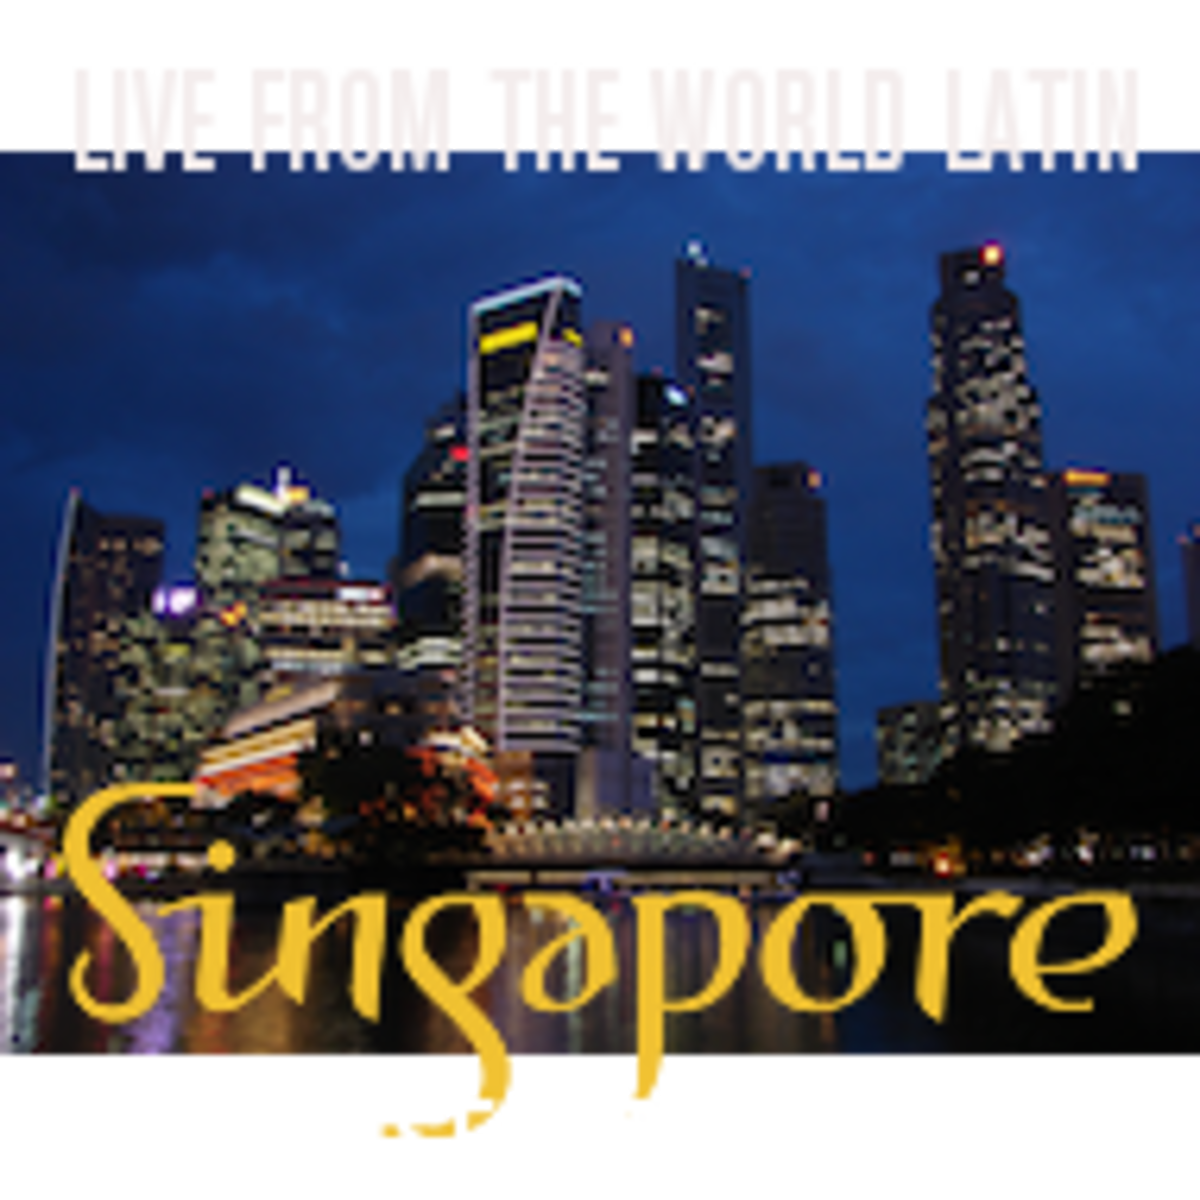 Live from Singapore!